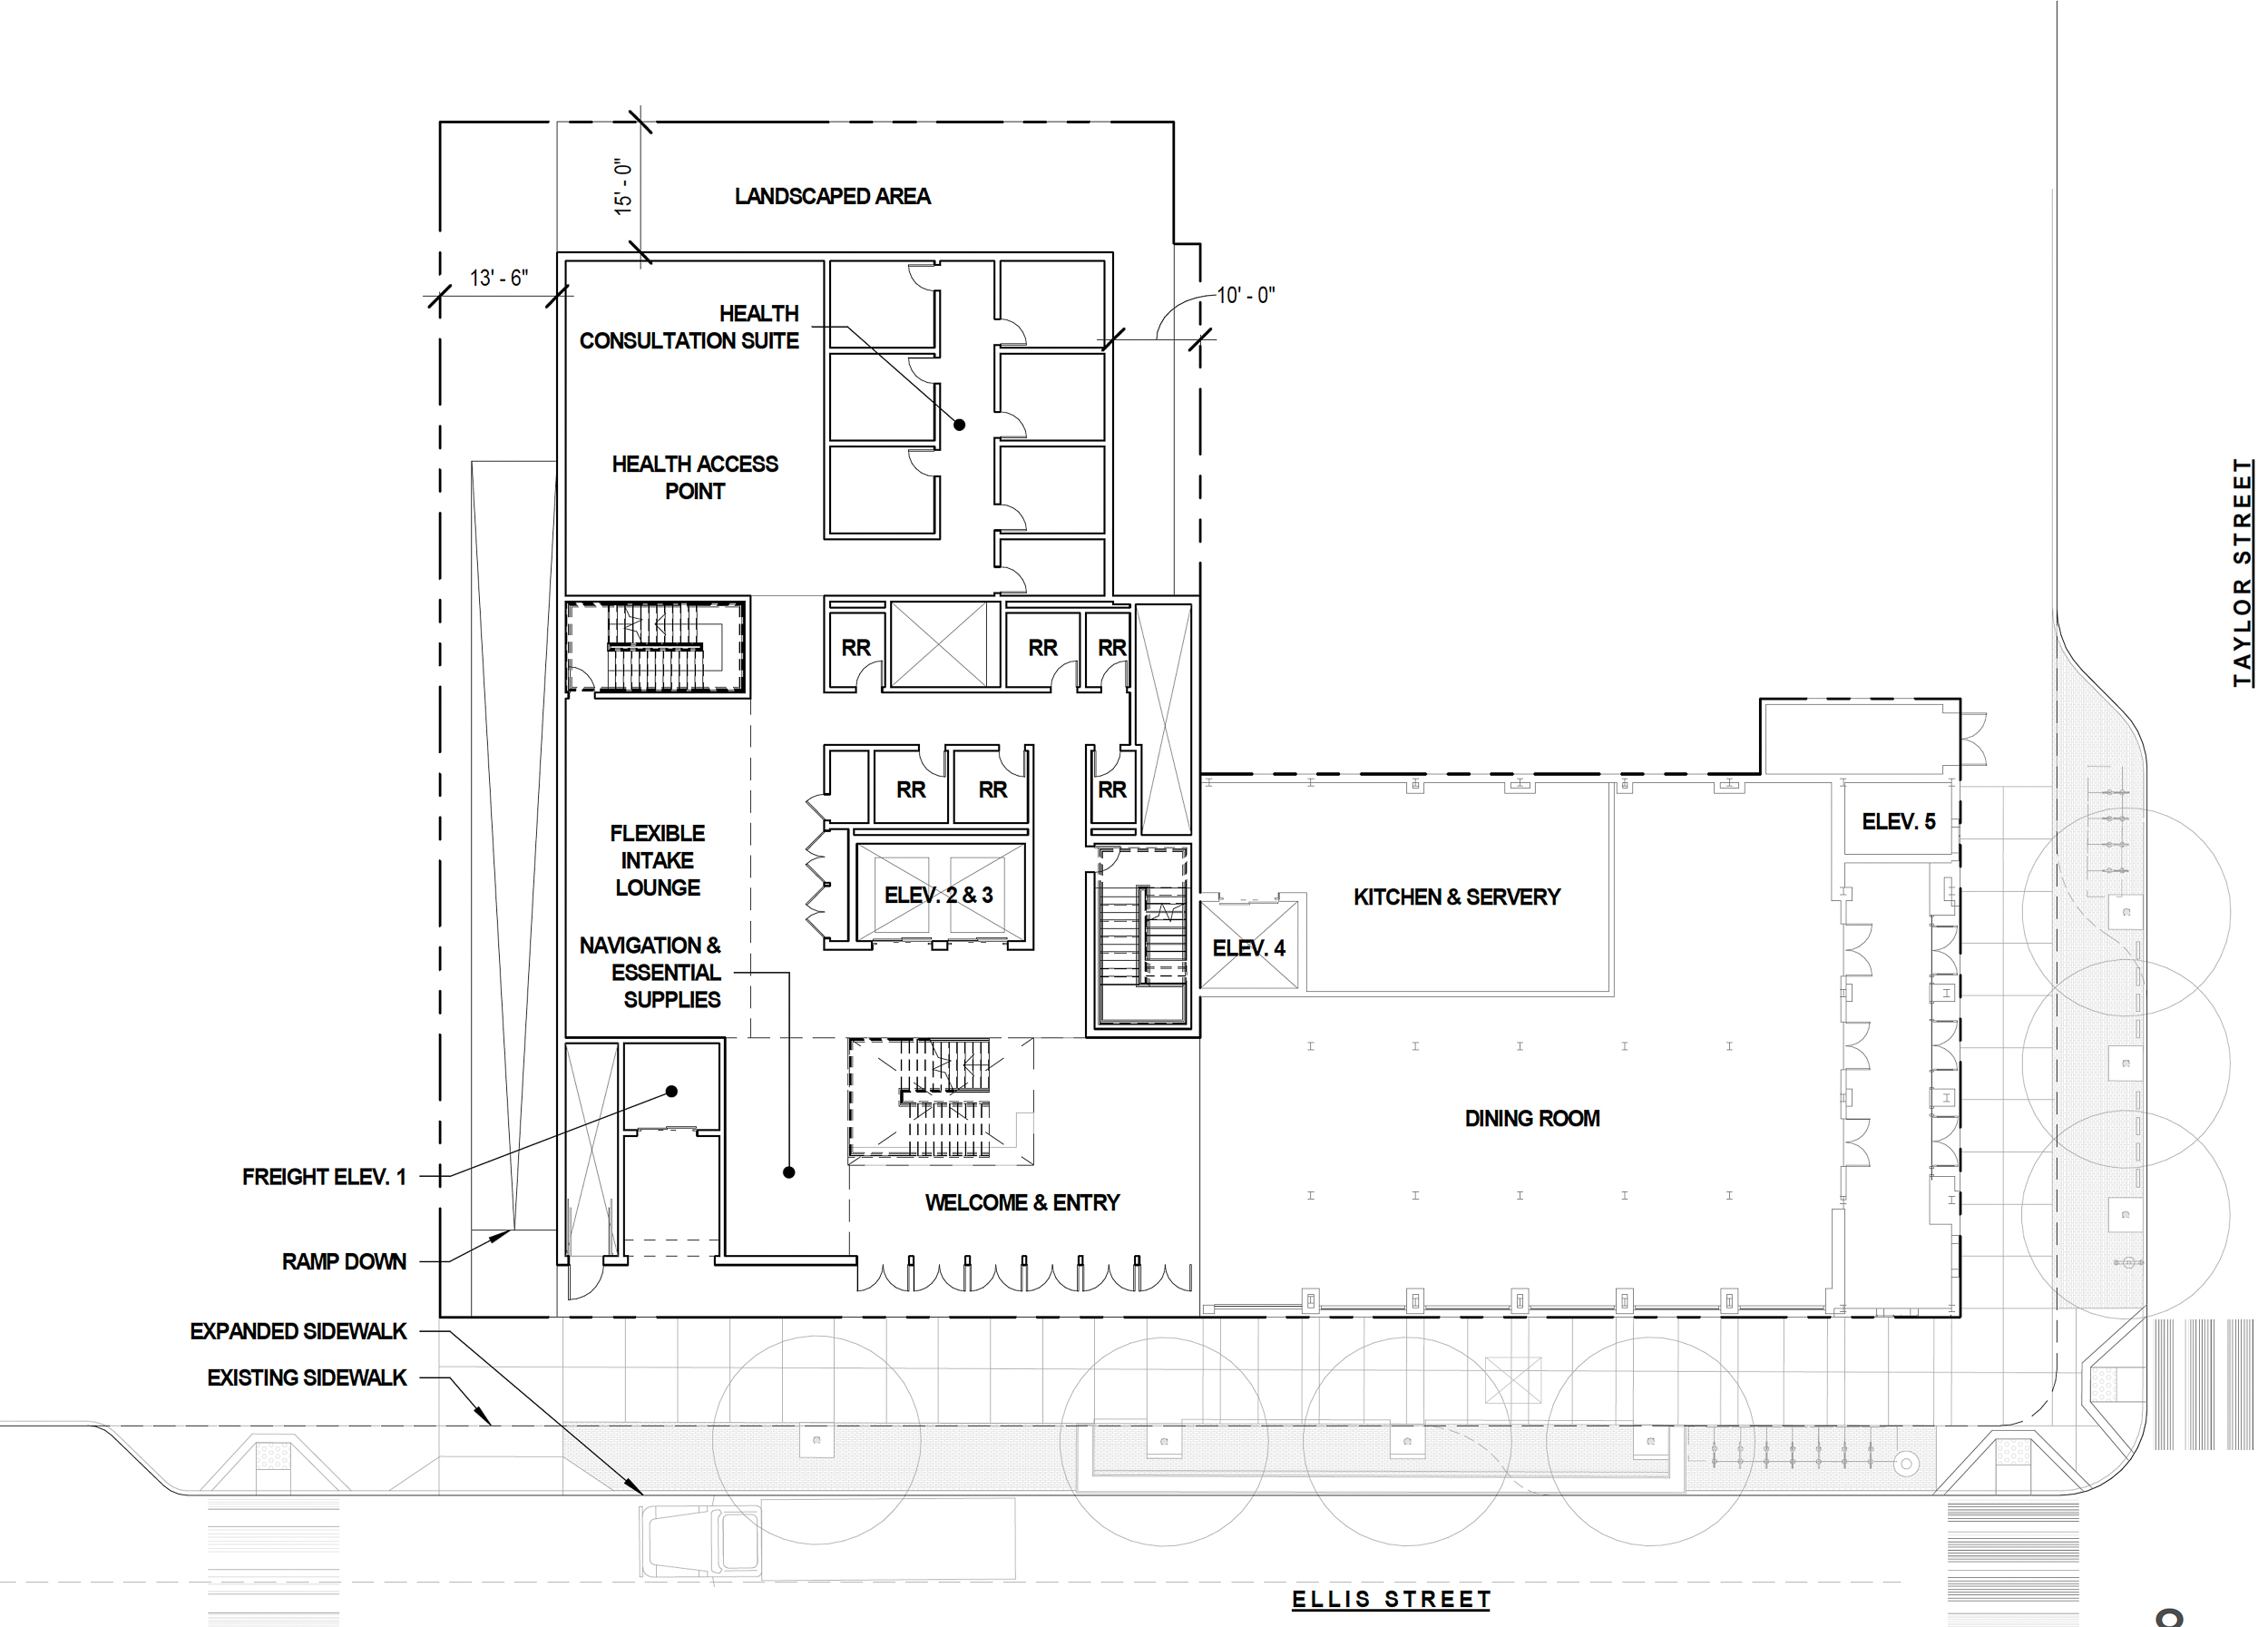 GLIDE Memorial Church and office expansion ground-level floor plan, illustration by EHDD Architecture